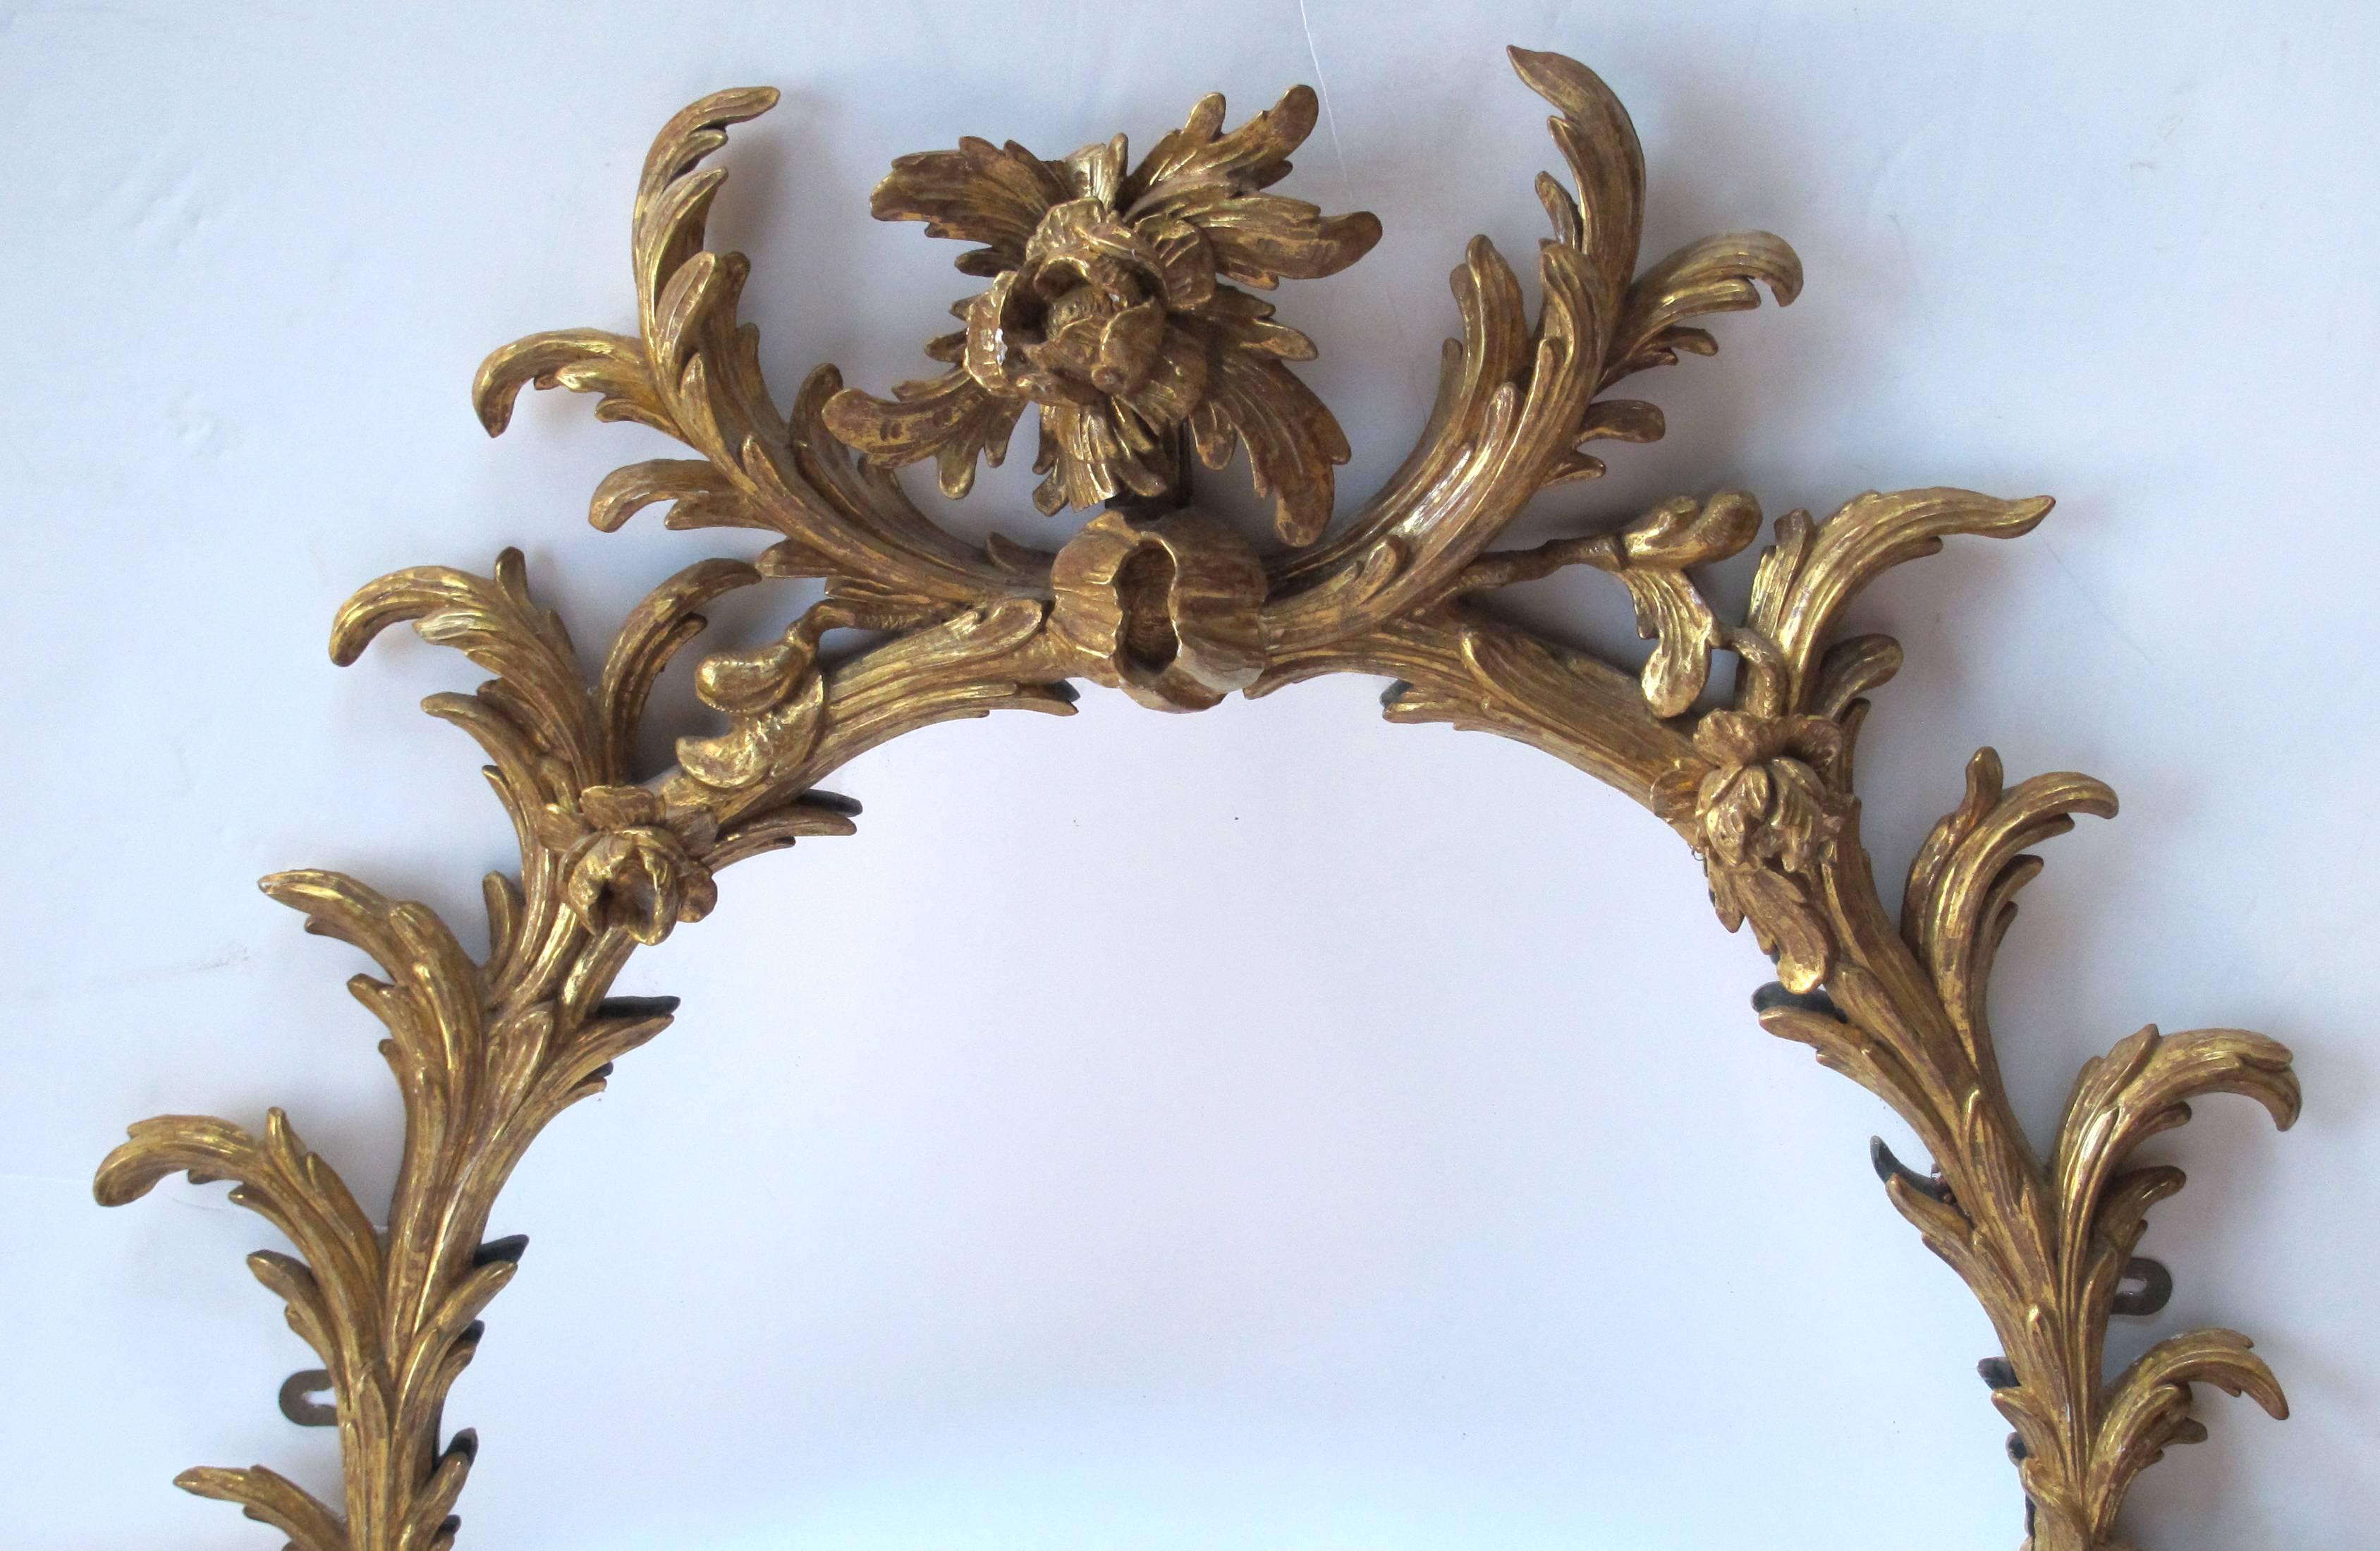 The well-carved and beautifully gilded oval mirror depicting lively acanthus leaves adorned with protruding flower heads.